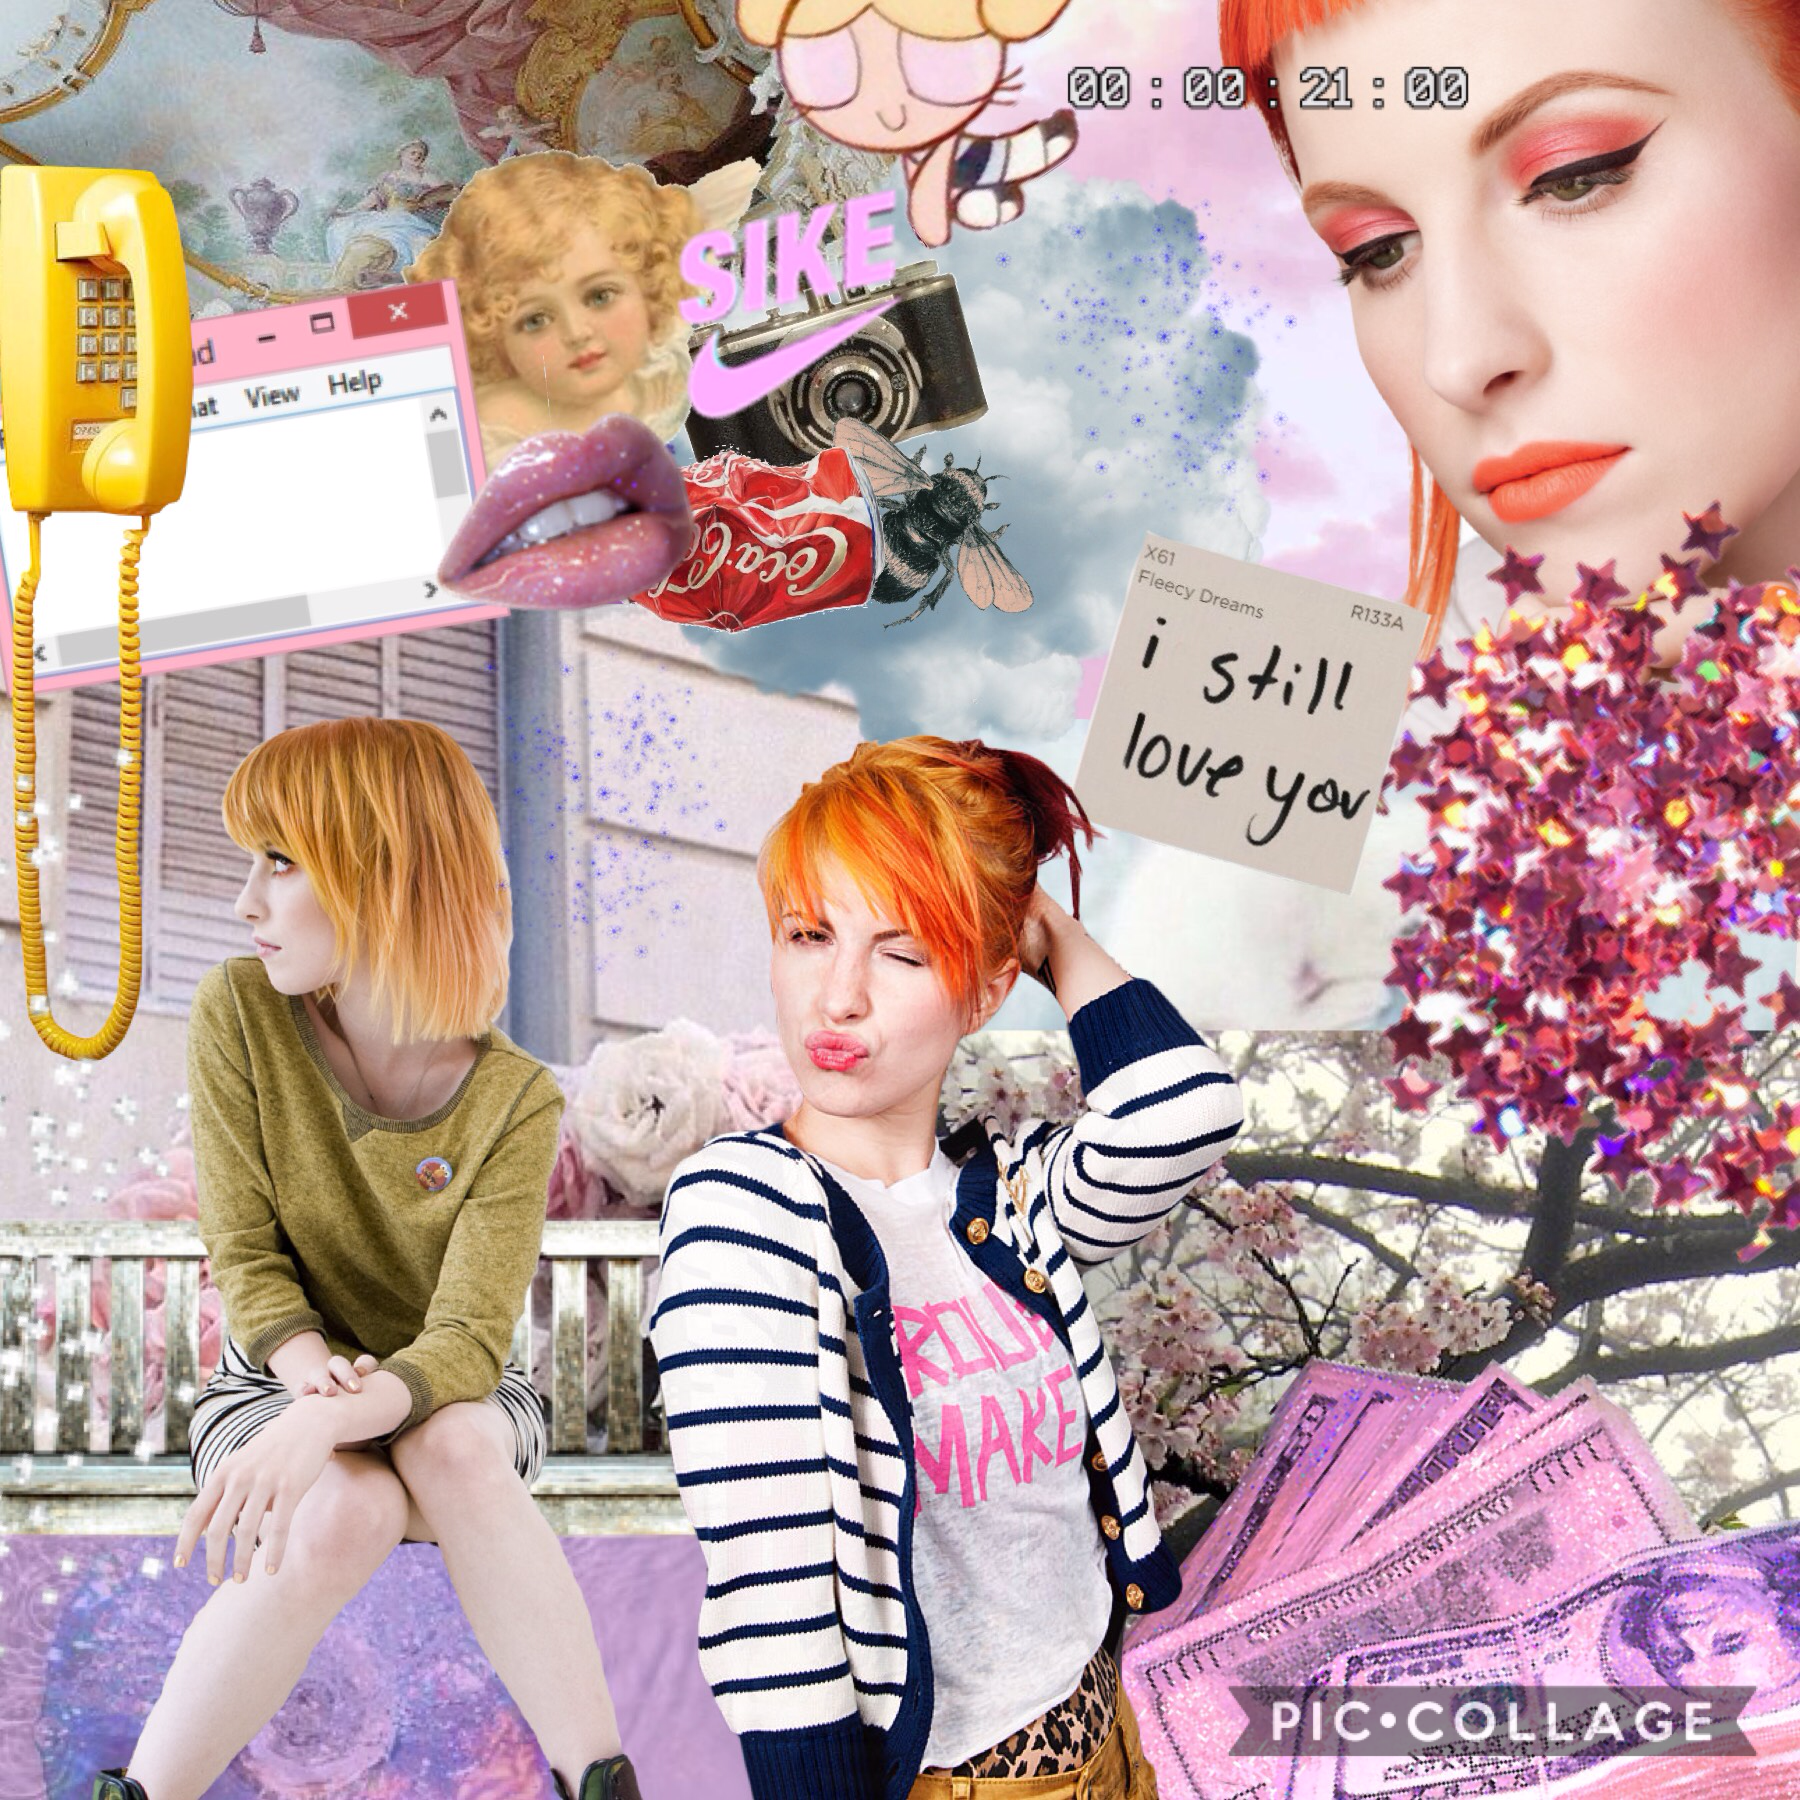 💫 •tappy!• 💫
hello, I'm new to piccollage :)
as u can see, I really love hayley williams 
qotd: what music do u like? 
